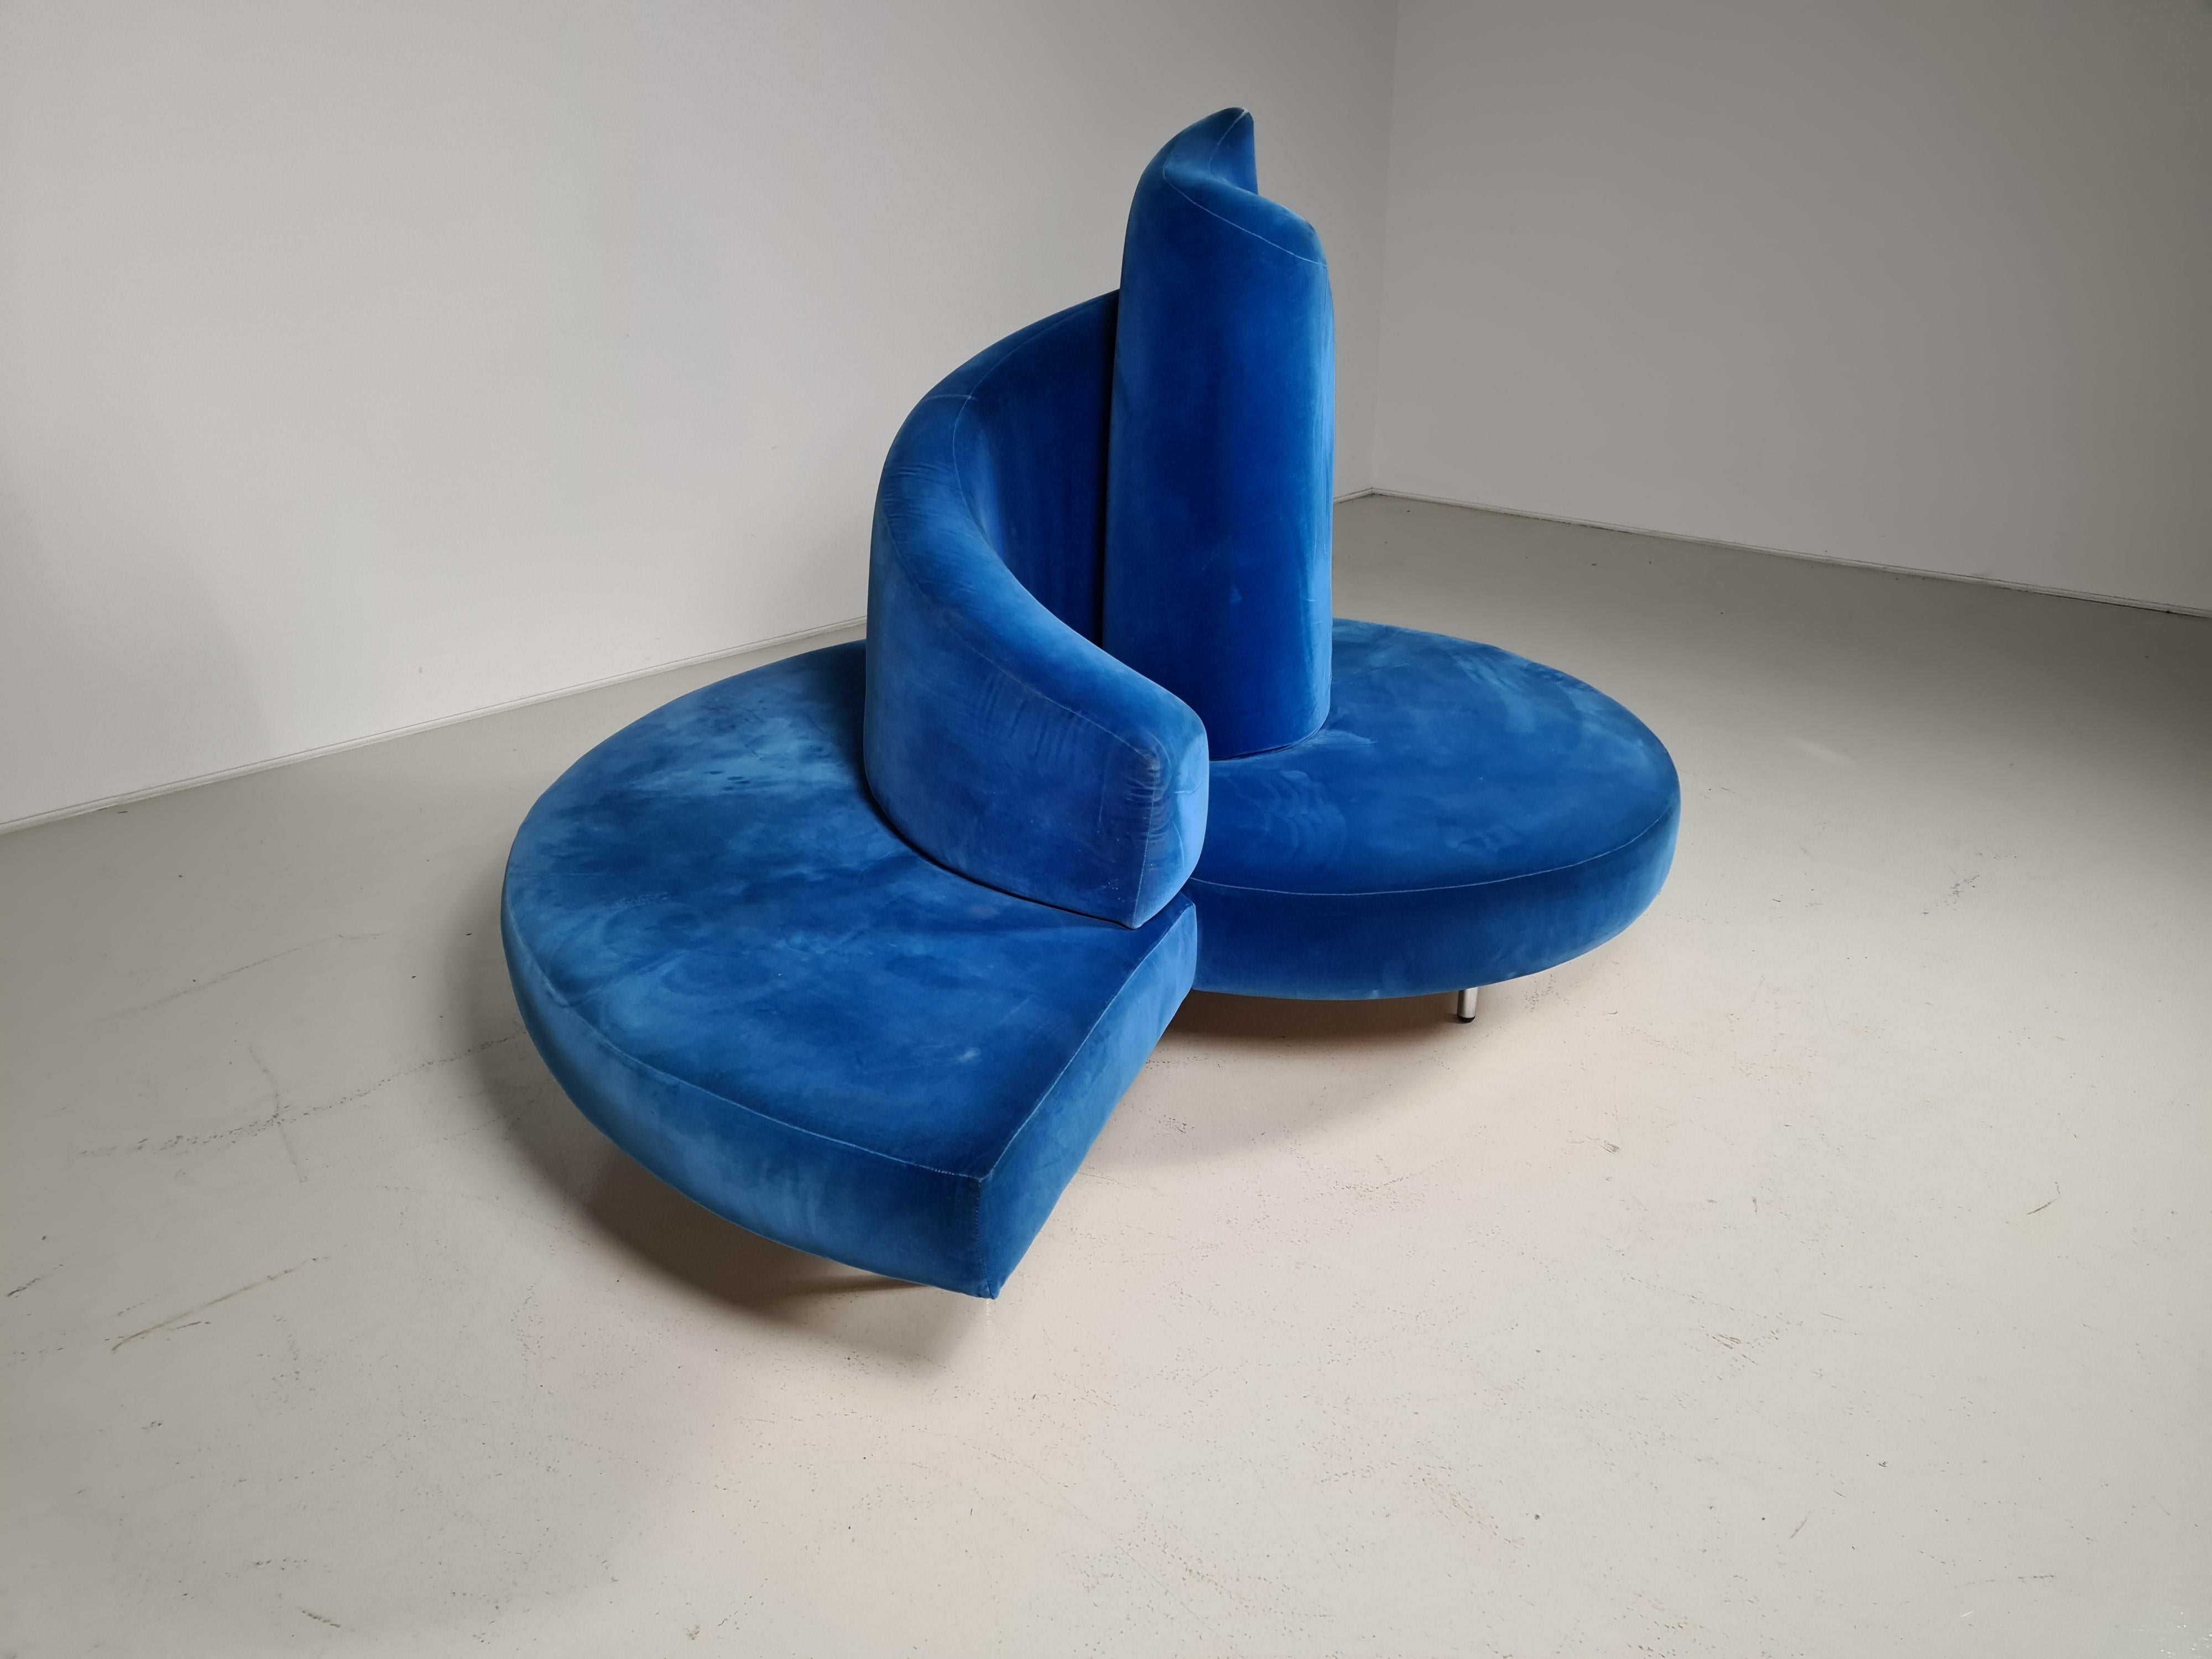 The Tatlin sofa was designed by Mario Cananzi and Roberto Semprini for Edra in the 1980s. Inspired by the famous Tatlin tower, a symbol of constructivism created by Vladimir Tatlin. In its original blue velvet.